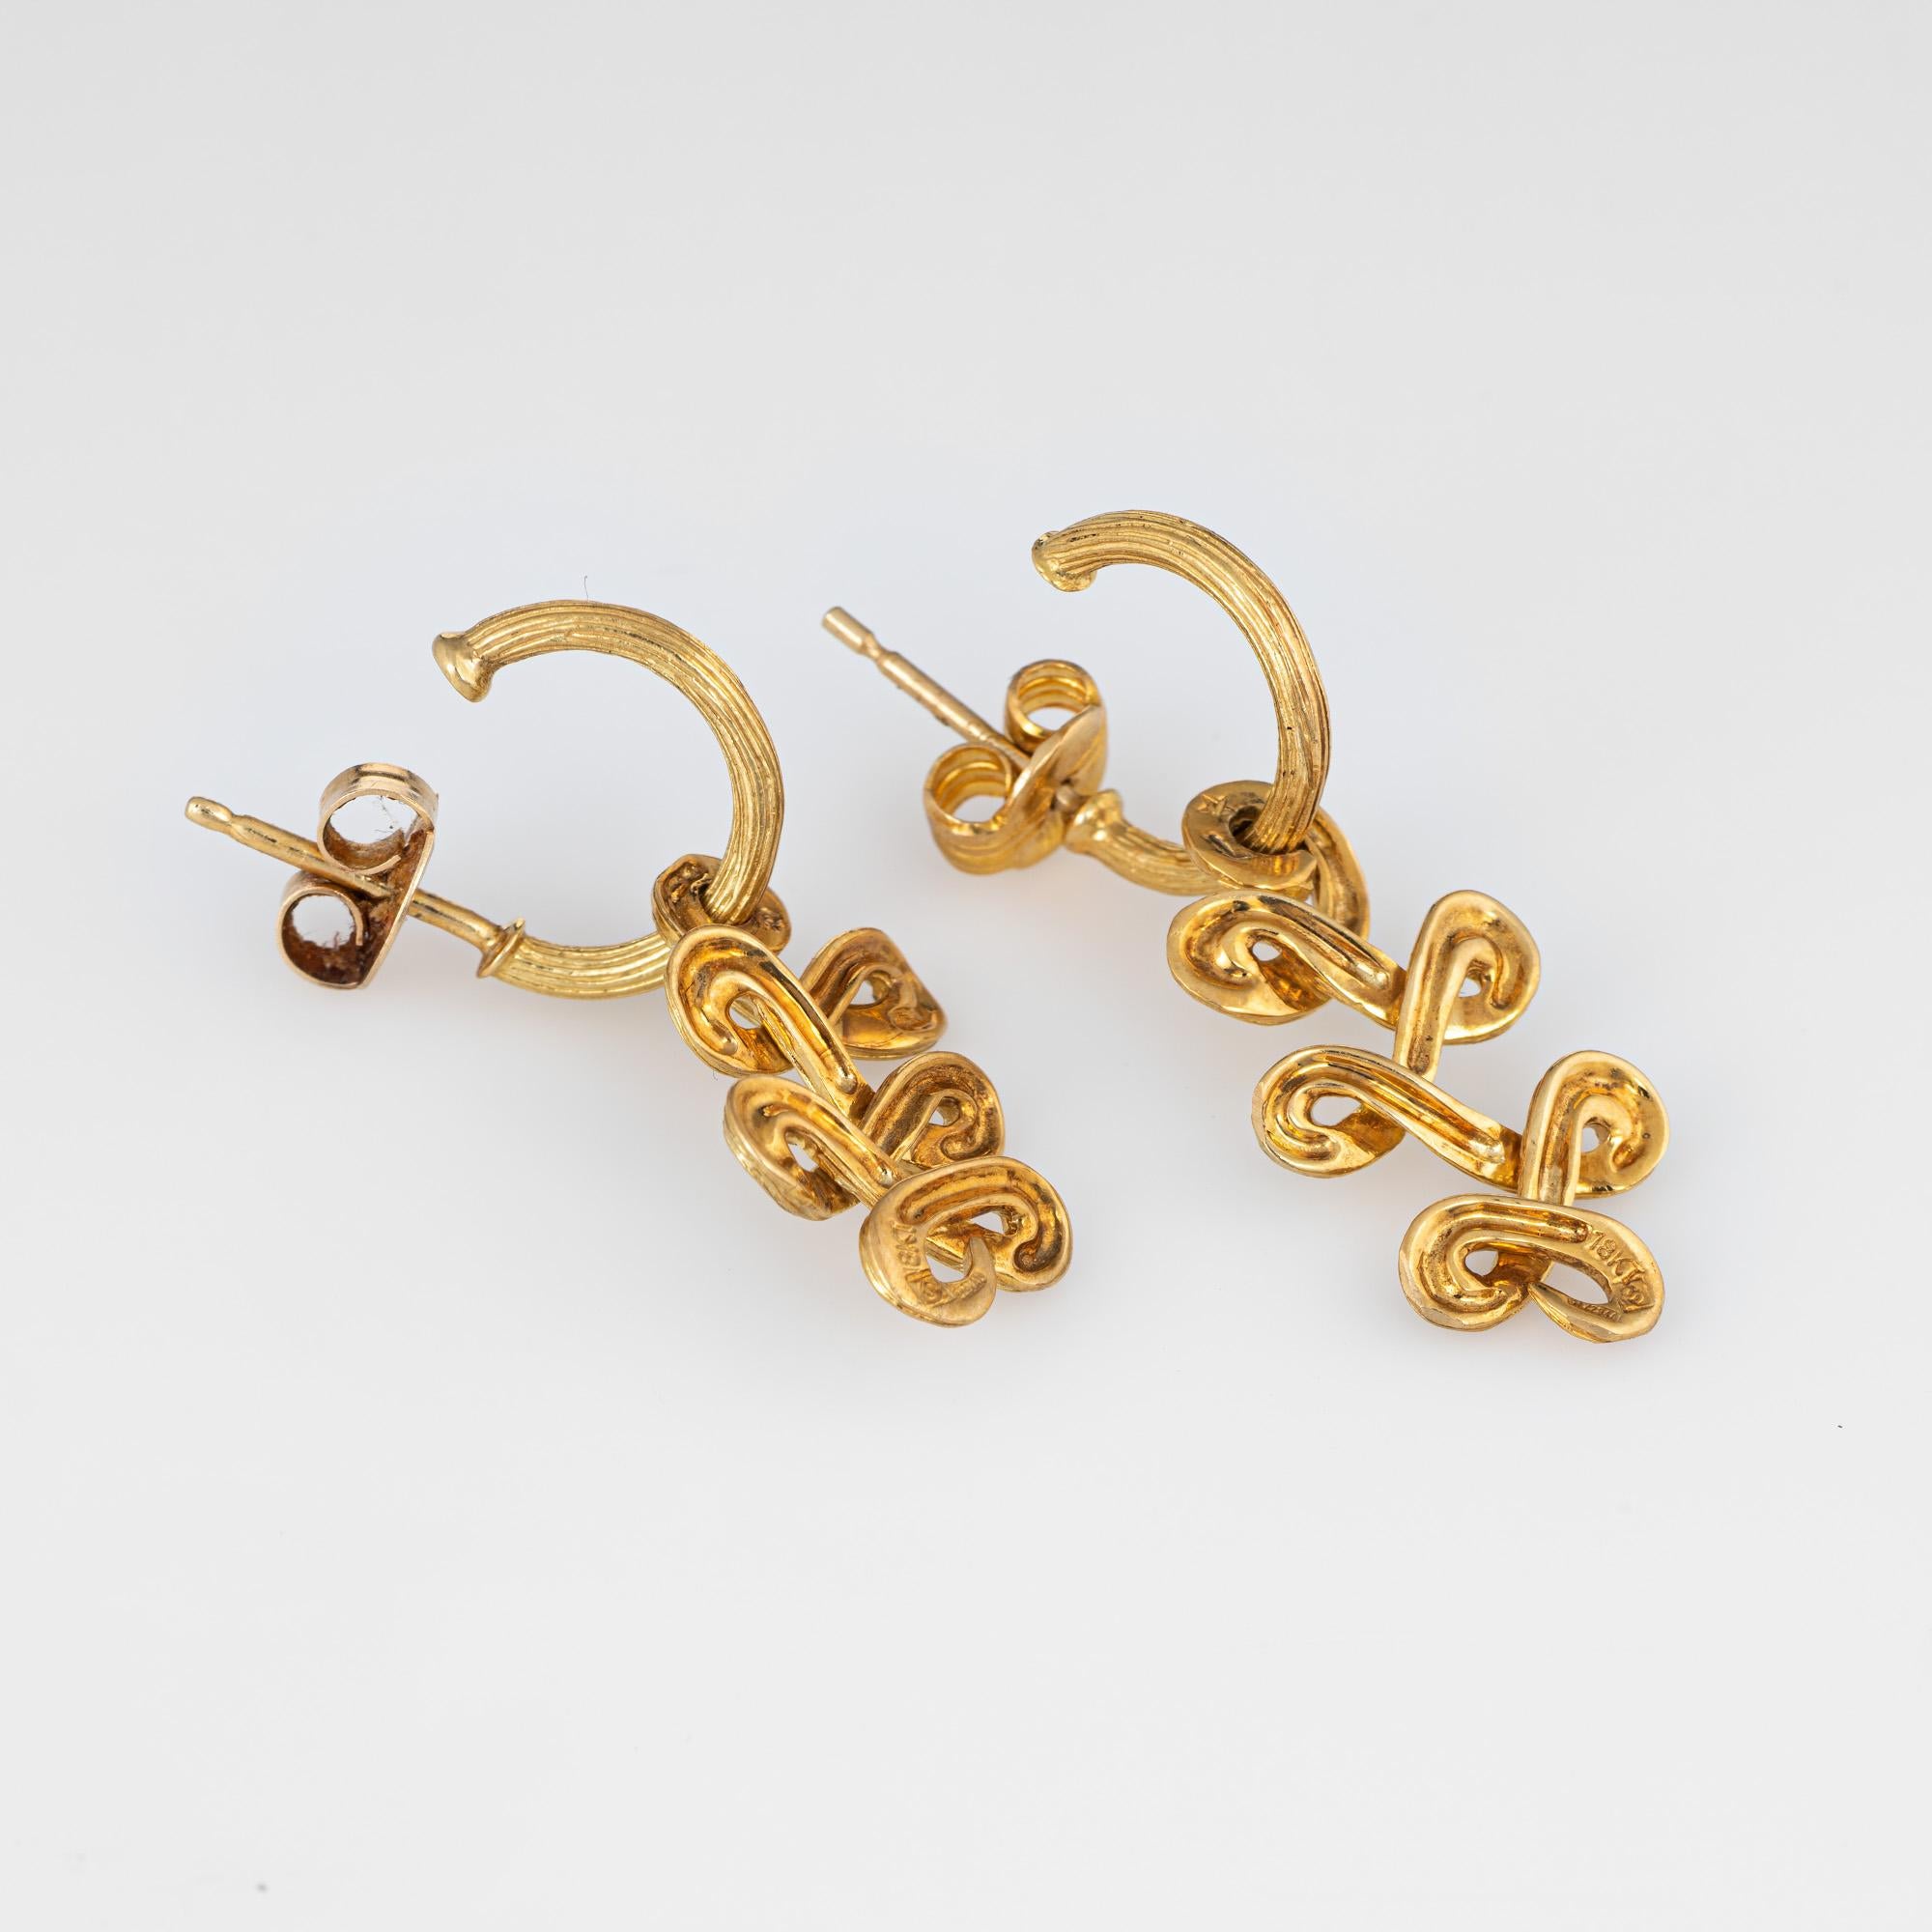 Elegant pair of pre-owned H Stern earrings crafted in 18k yellow gold. 

The elegant earrings feature a cascading ribbon style design. The earrings are fitted with posts & butterfly backings for pierced ears.

The earrings are in excellent original